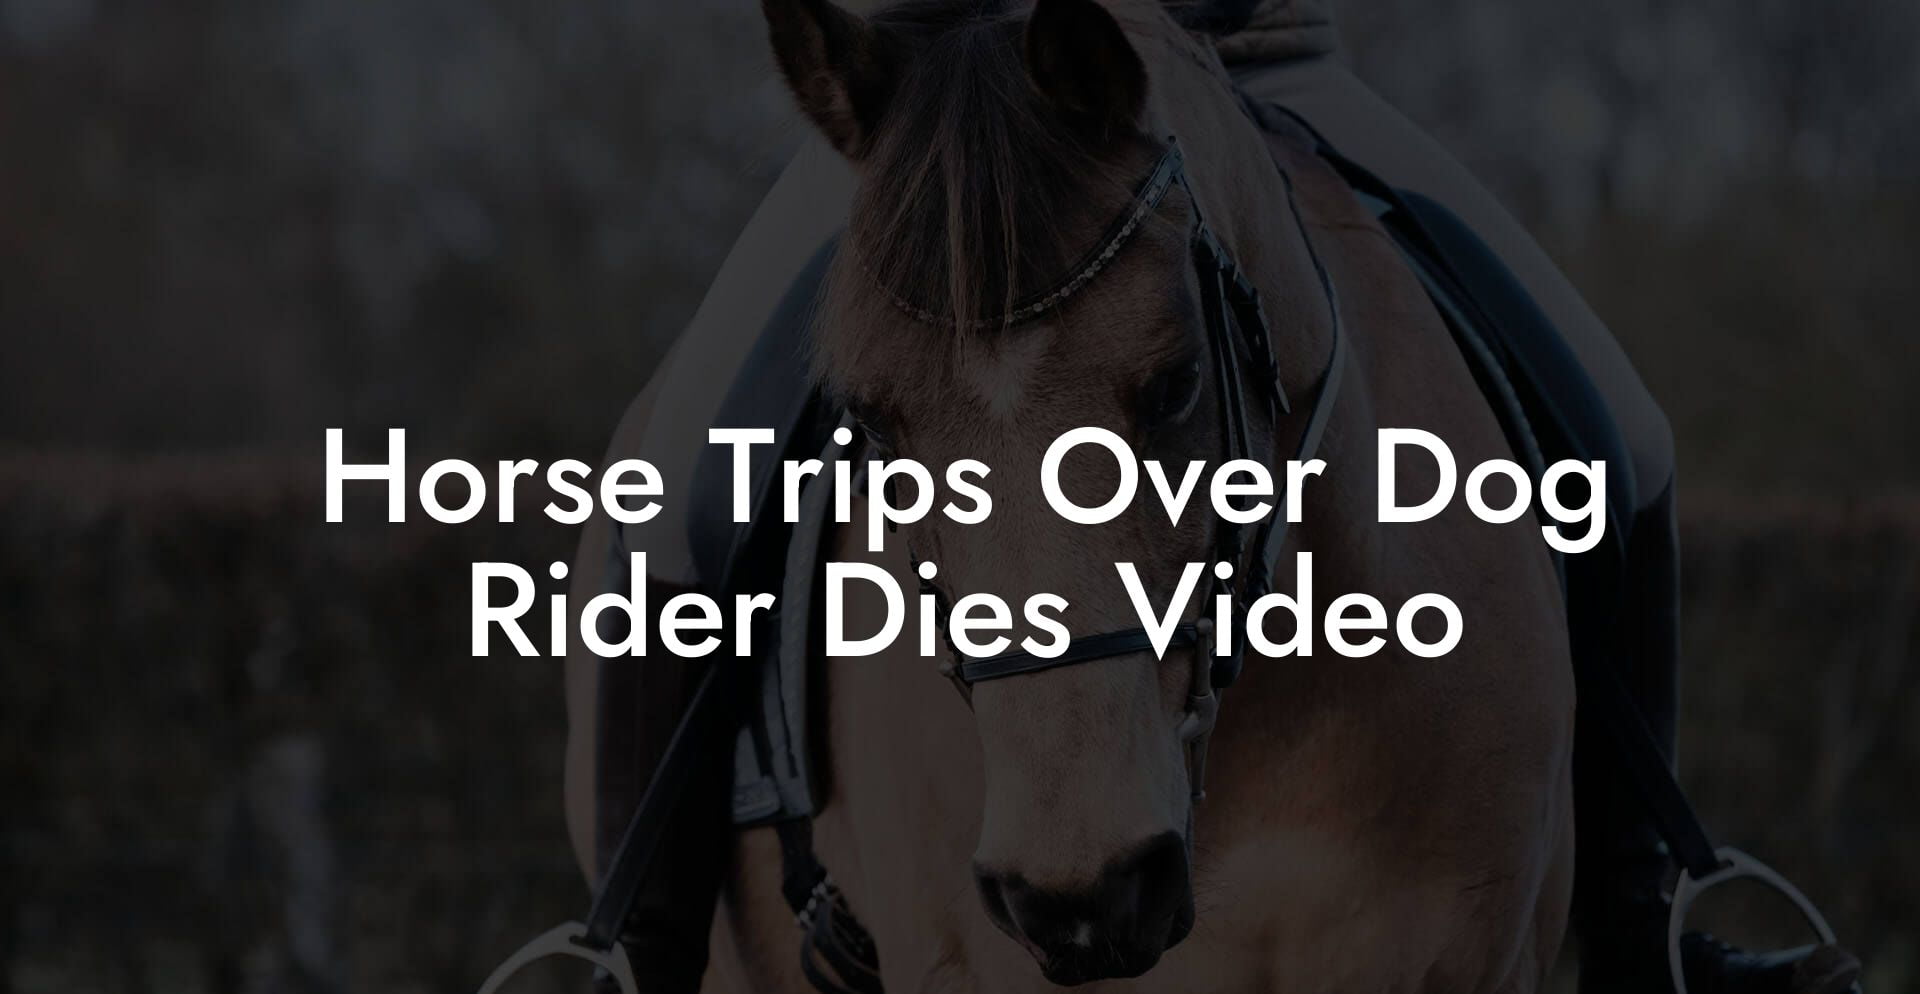 horse trips over dog video